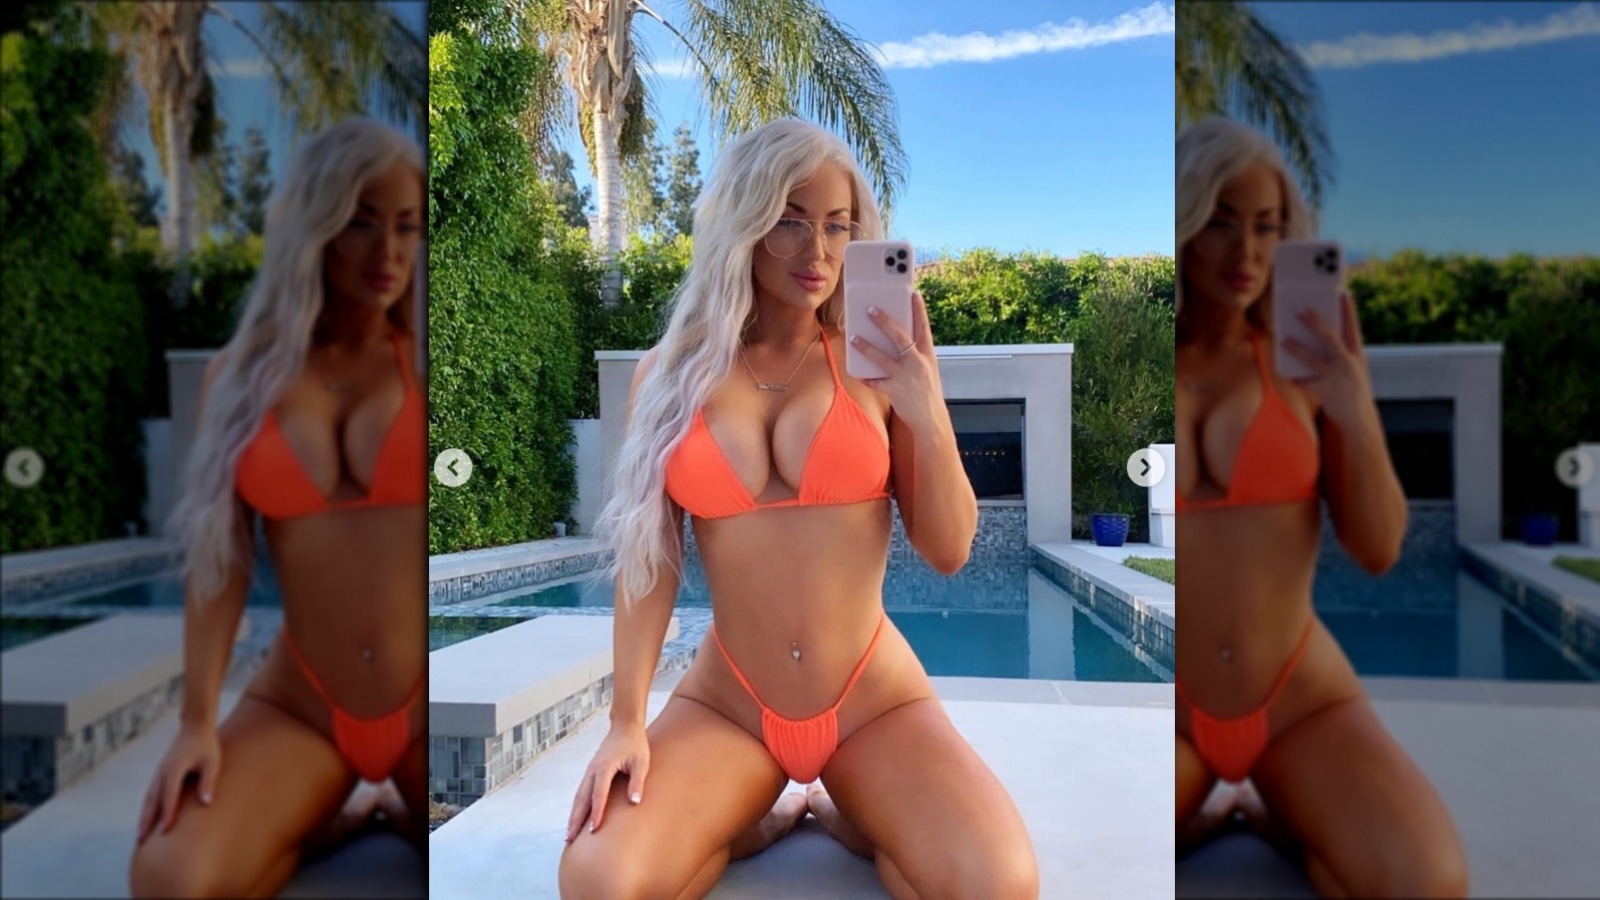 Lacie kay somers